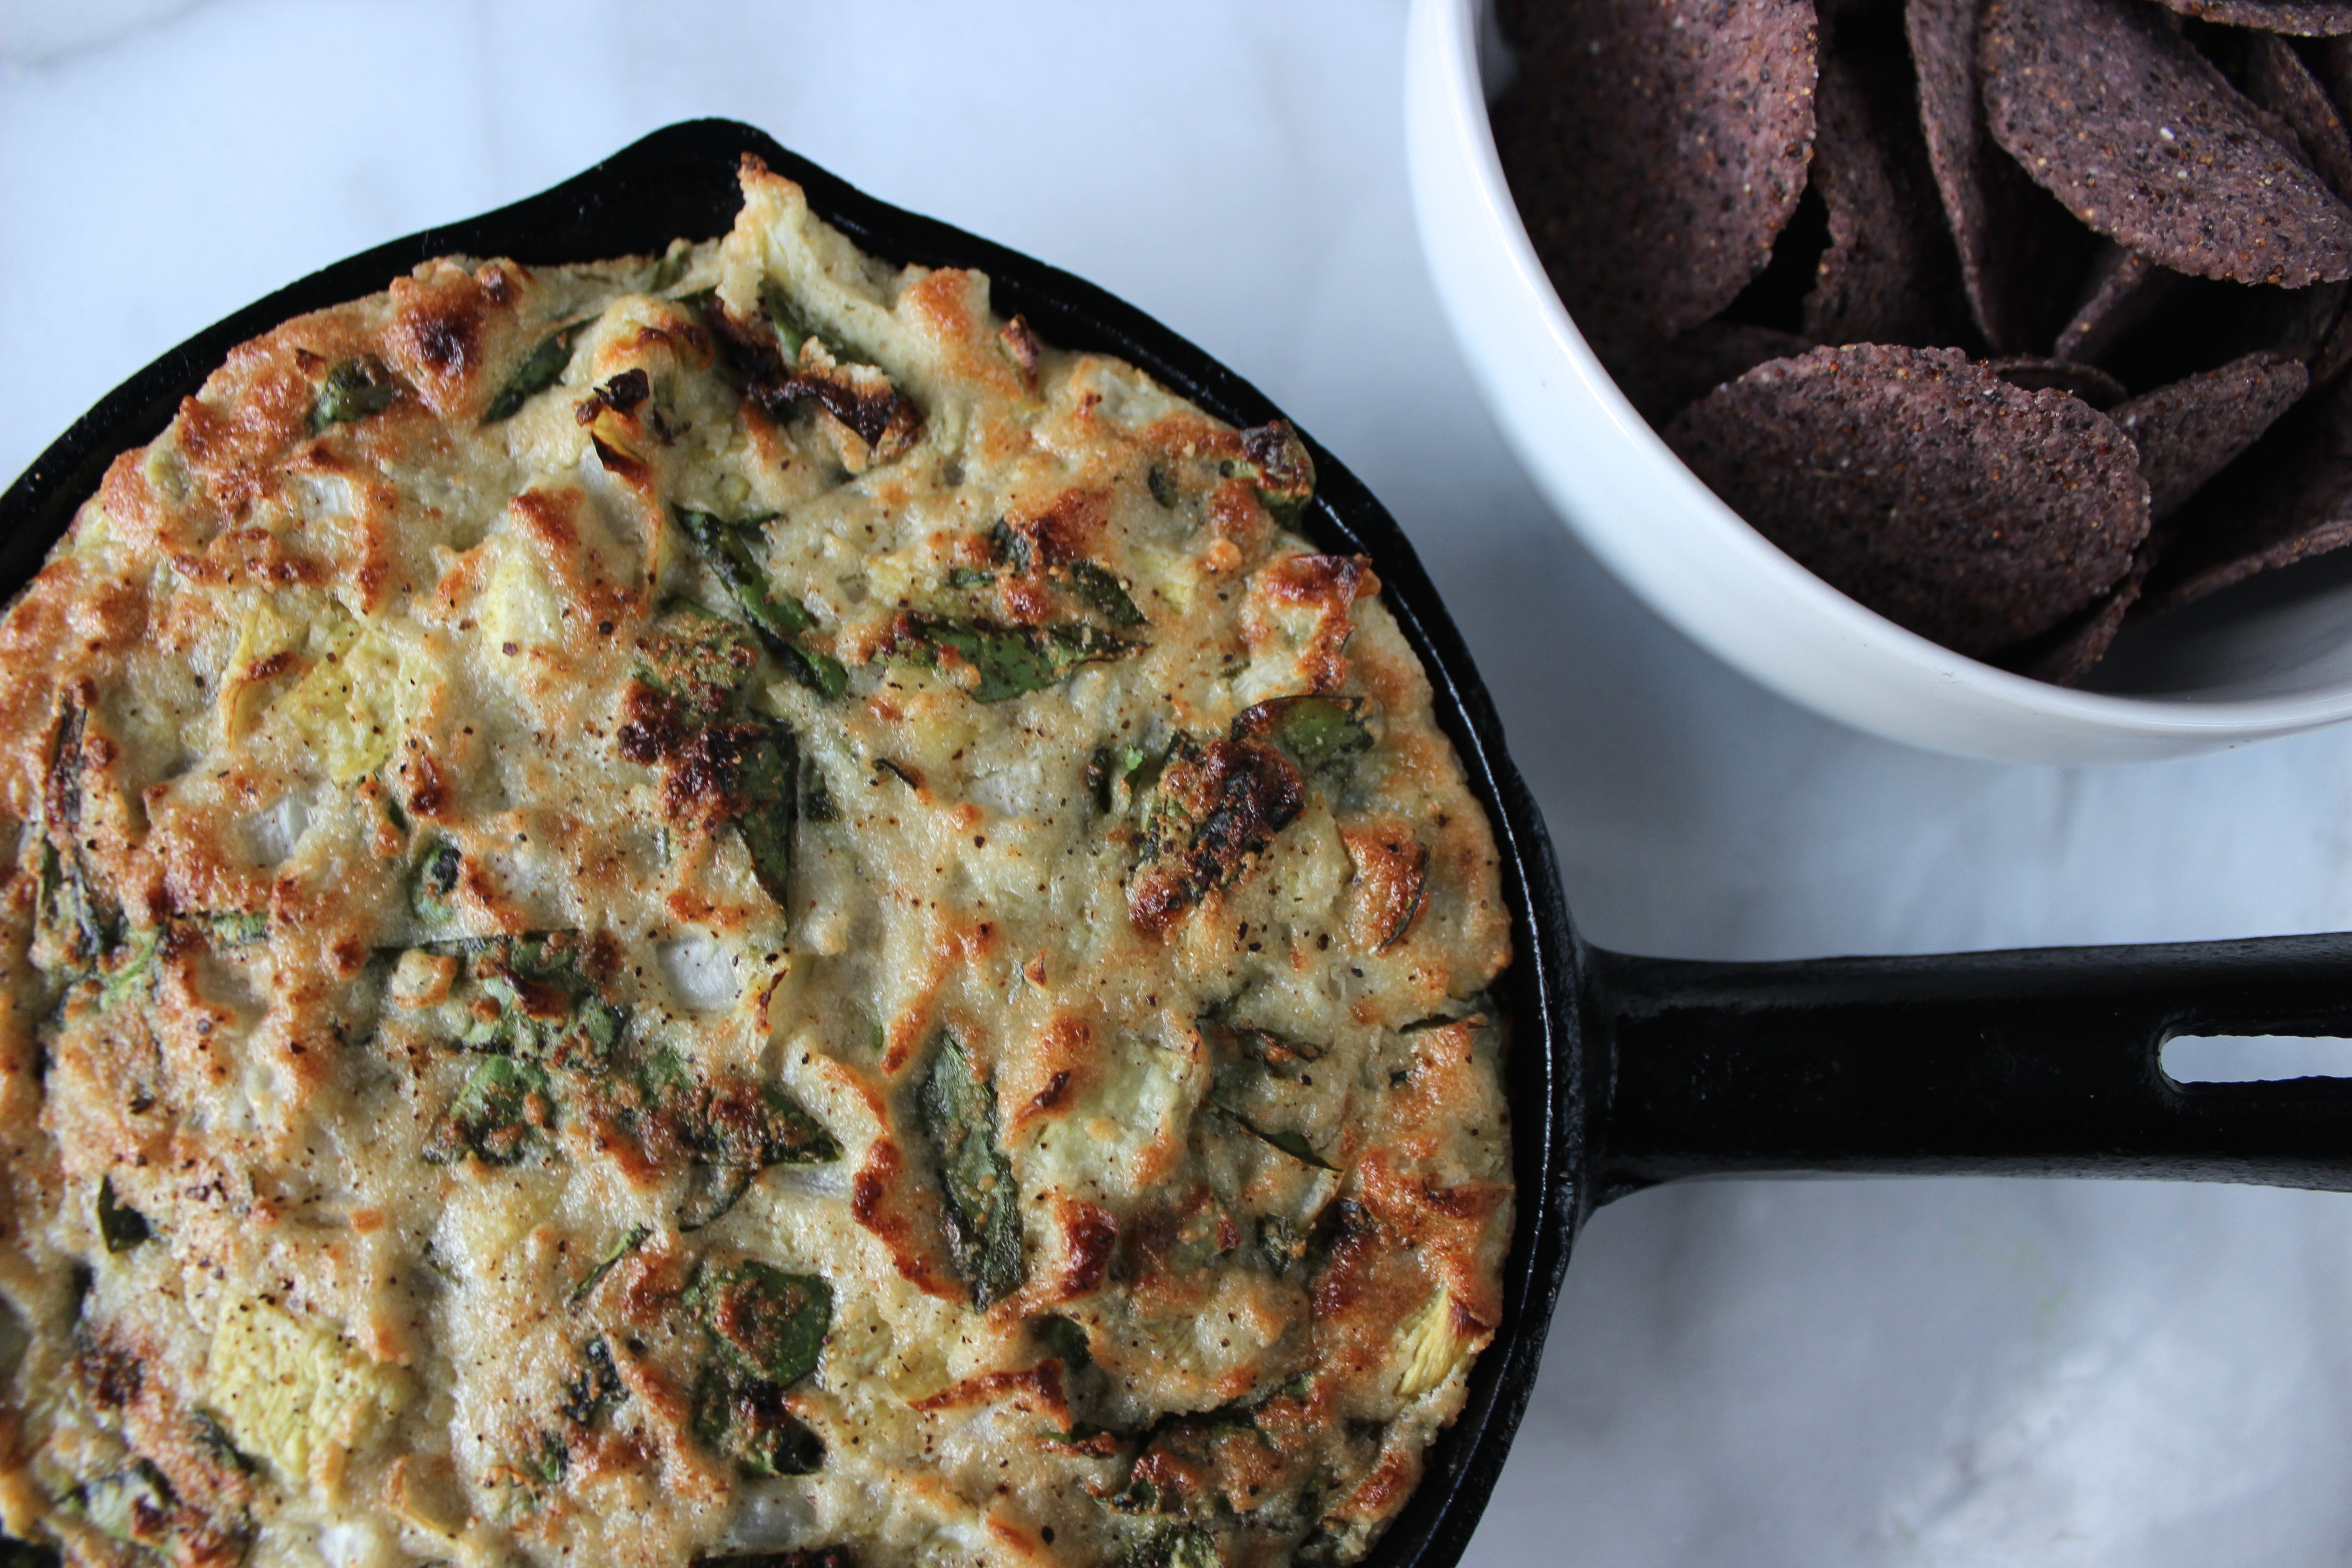 HEALTHY HOT SPINACH AND ARTICHOKE DIP courtesy of Ritual Wellness curated by Project Juice